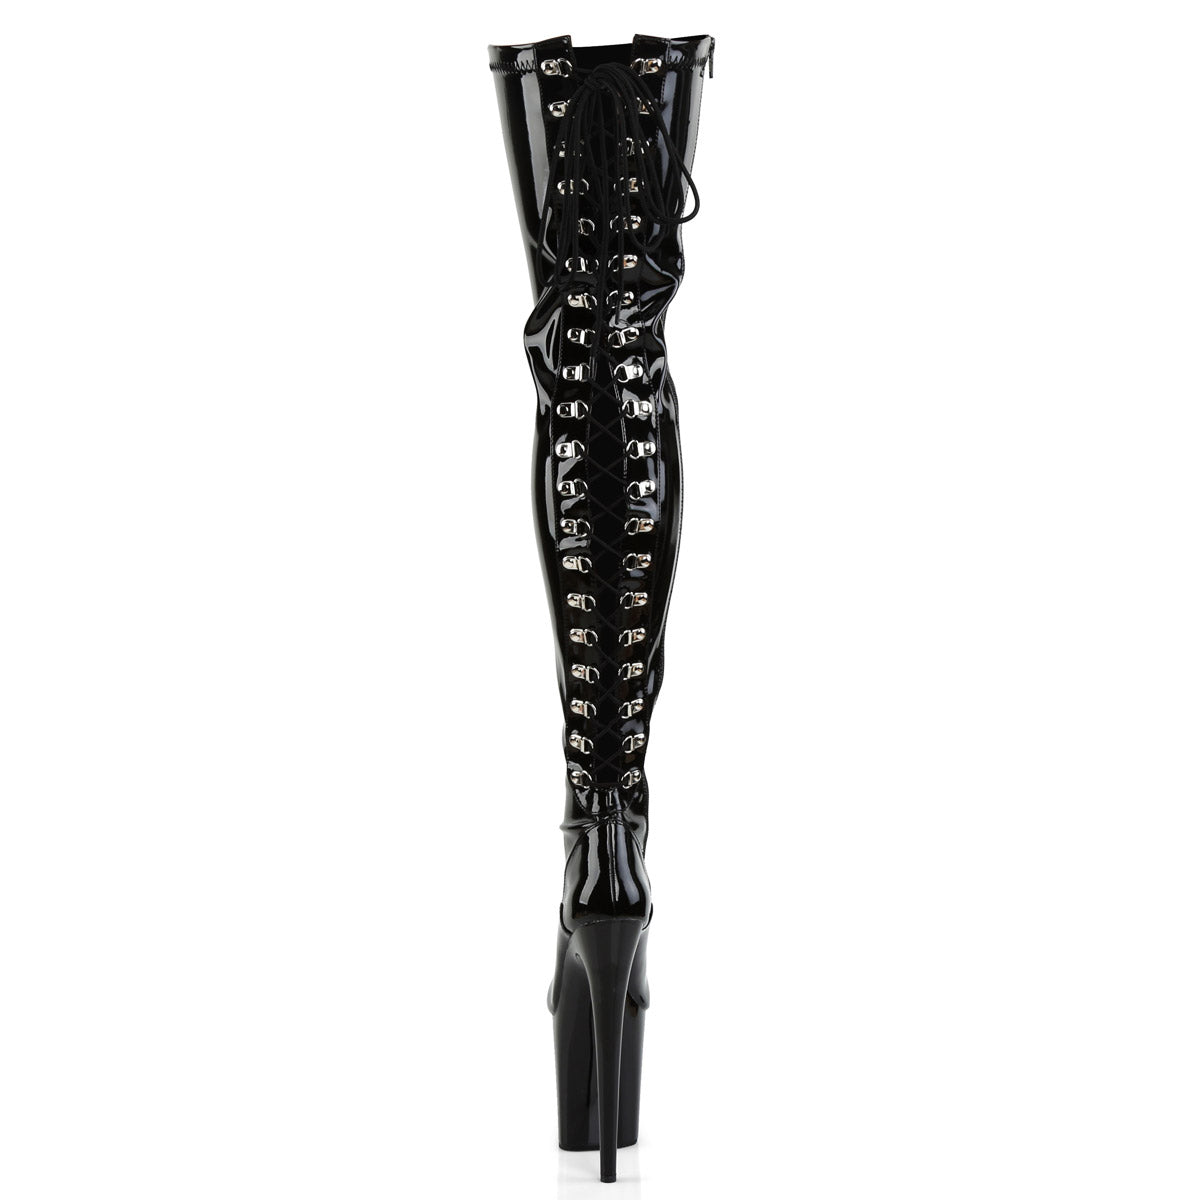 8" Heel, 4" PF Lace-Up Back Stretch Thigh Boot, Side Zip Blk Str Pat/Blk Pleaser Pleaser FLAMINGO/3063